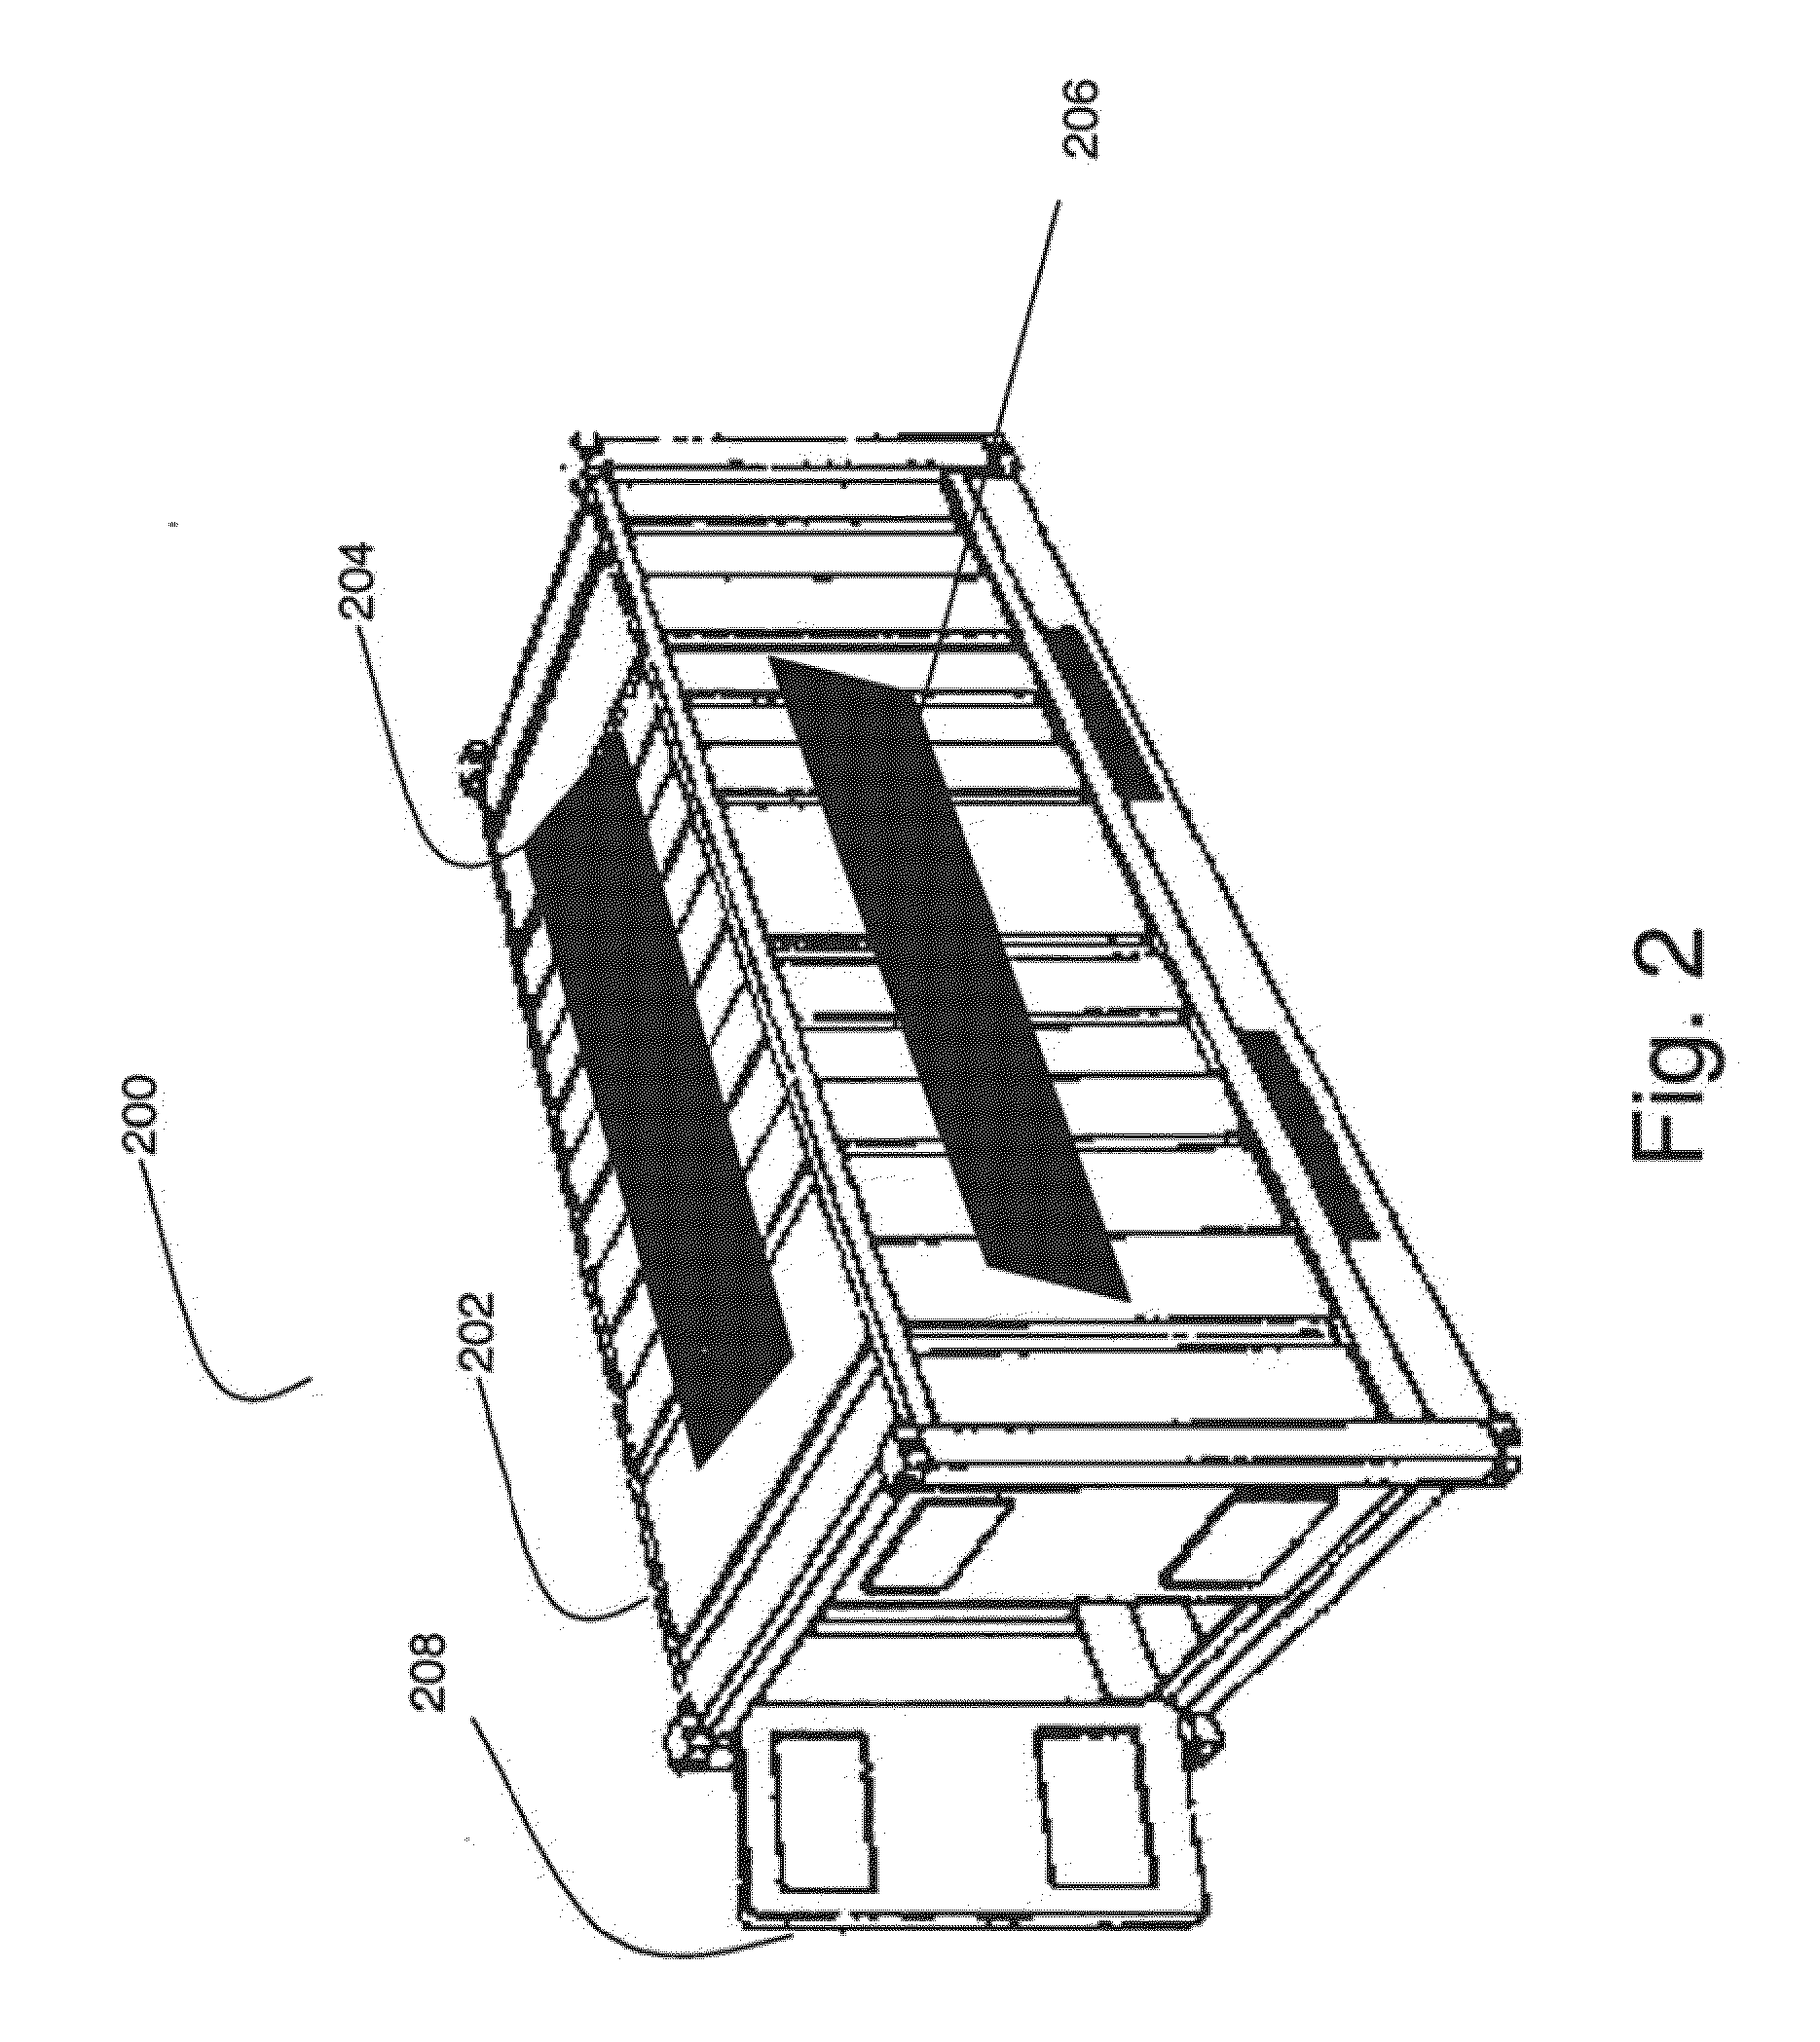 System and Method for Rechargeable Power System for a Cargo Container Monitoring and Security System